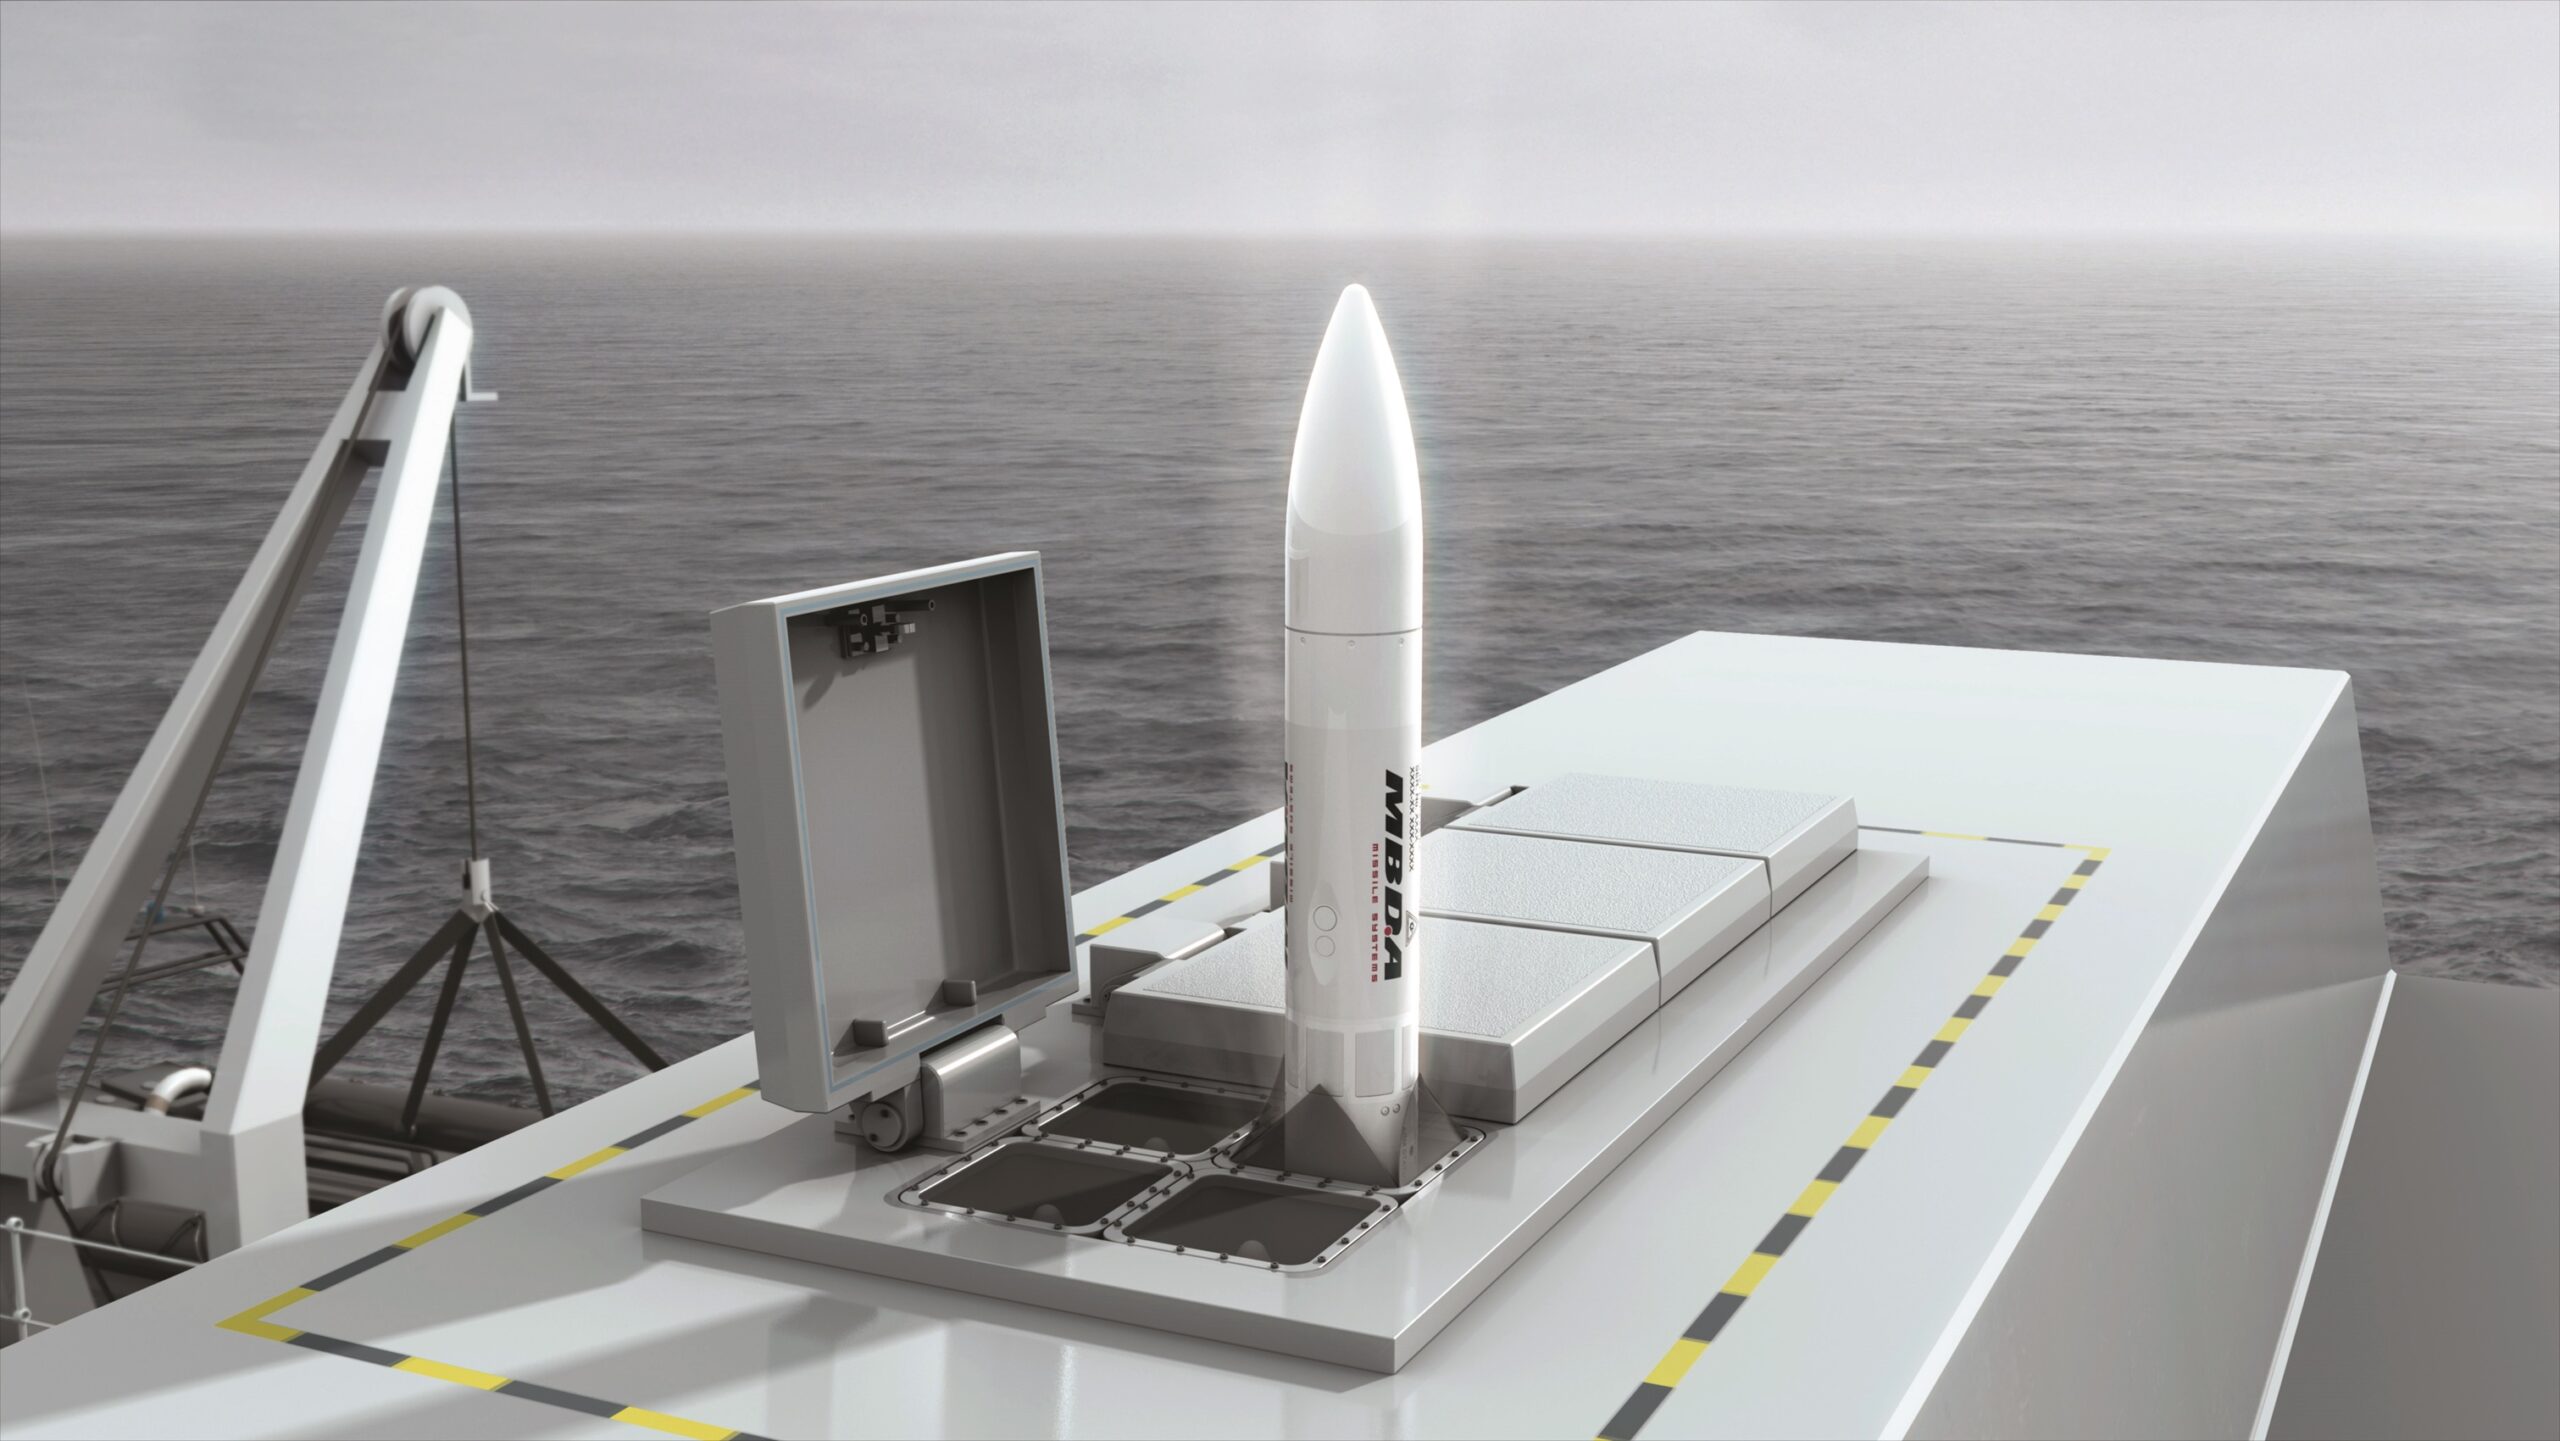 Poland selects Sea Ceptor for installation on new frigates